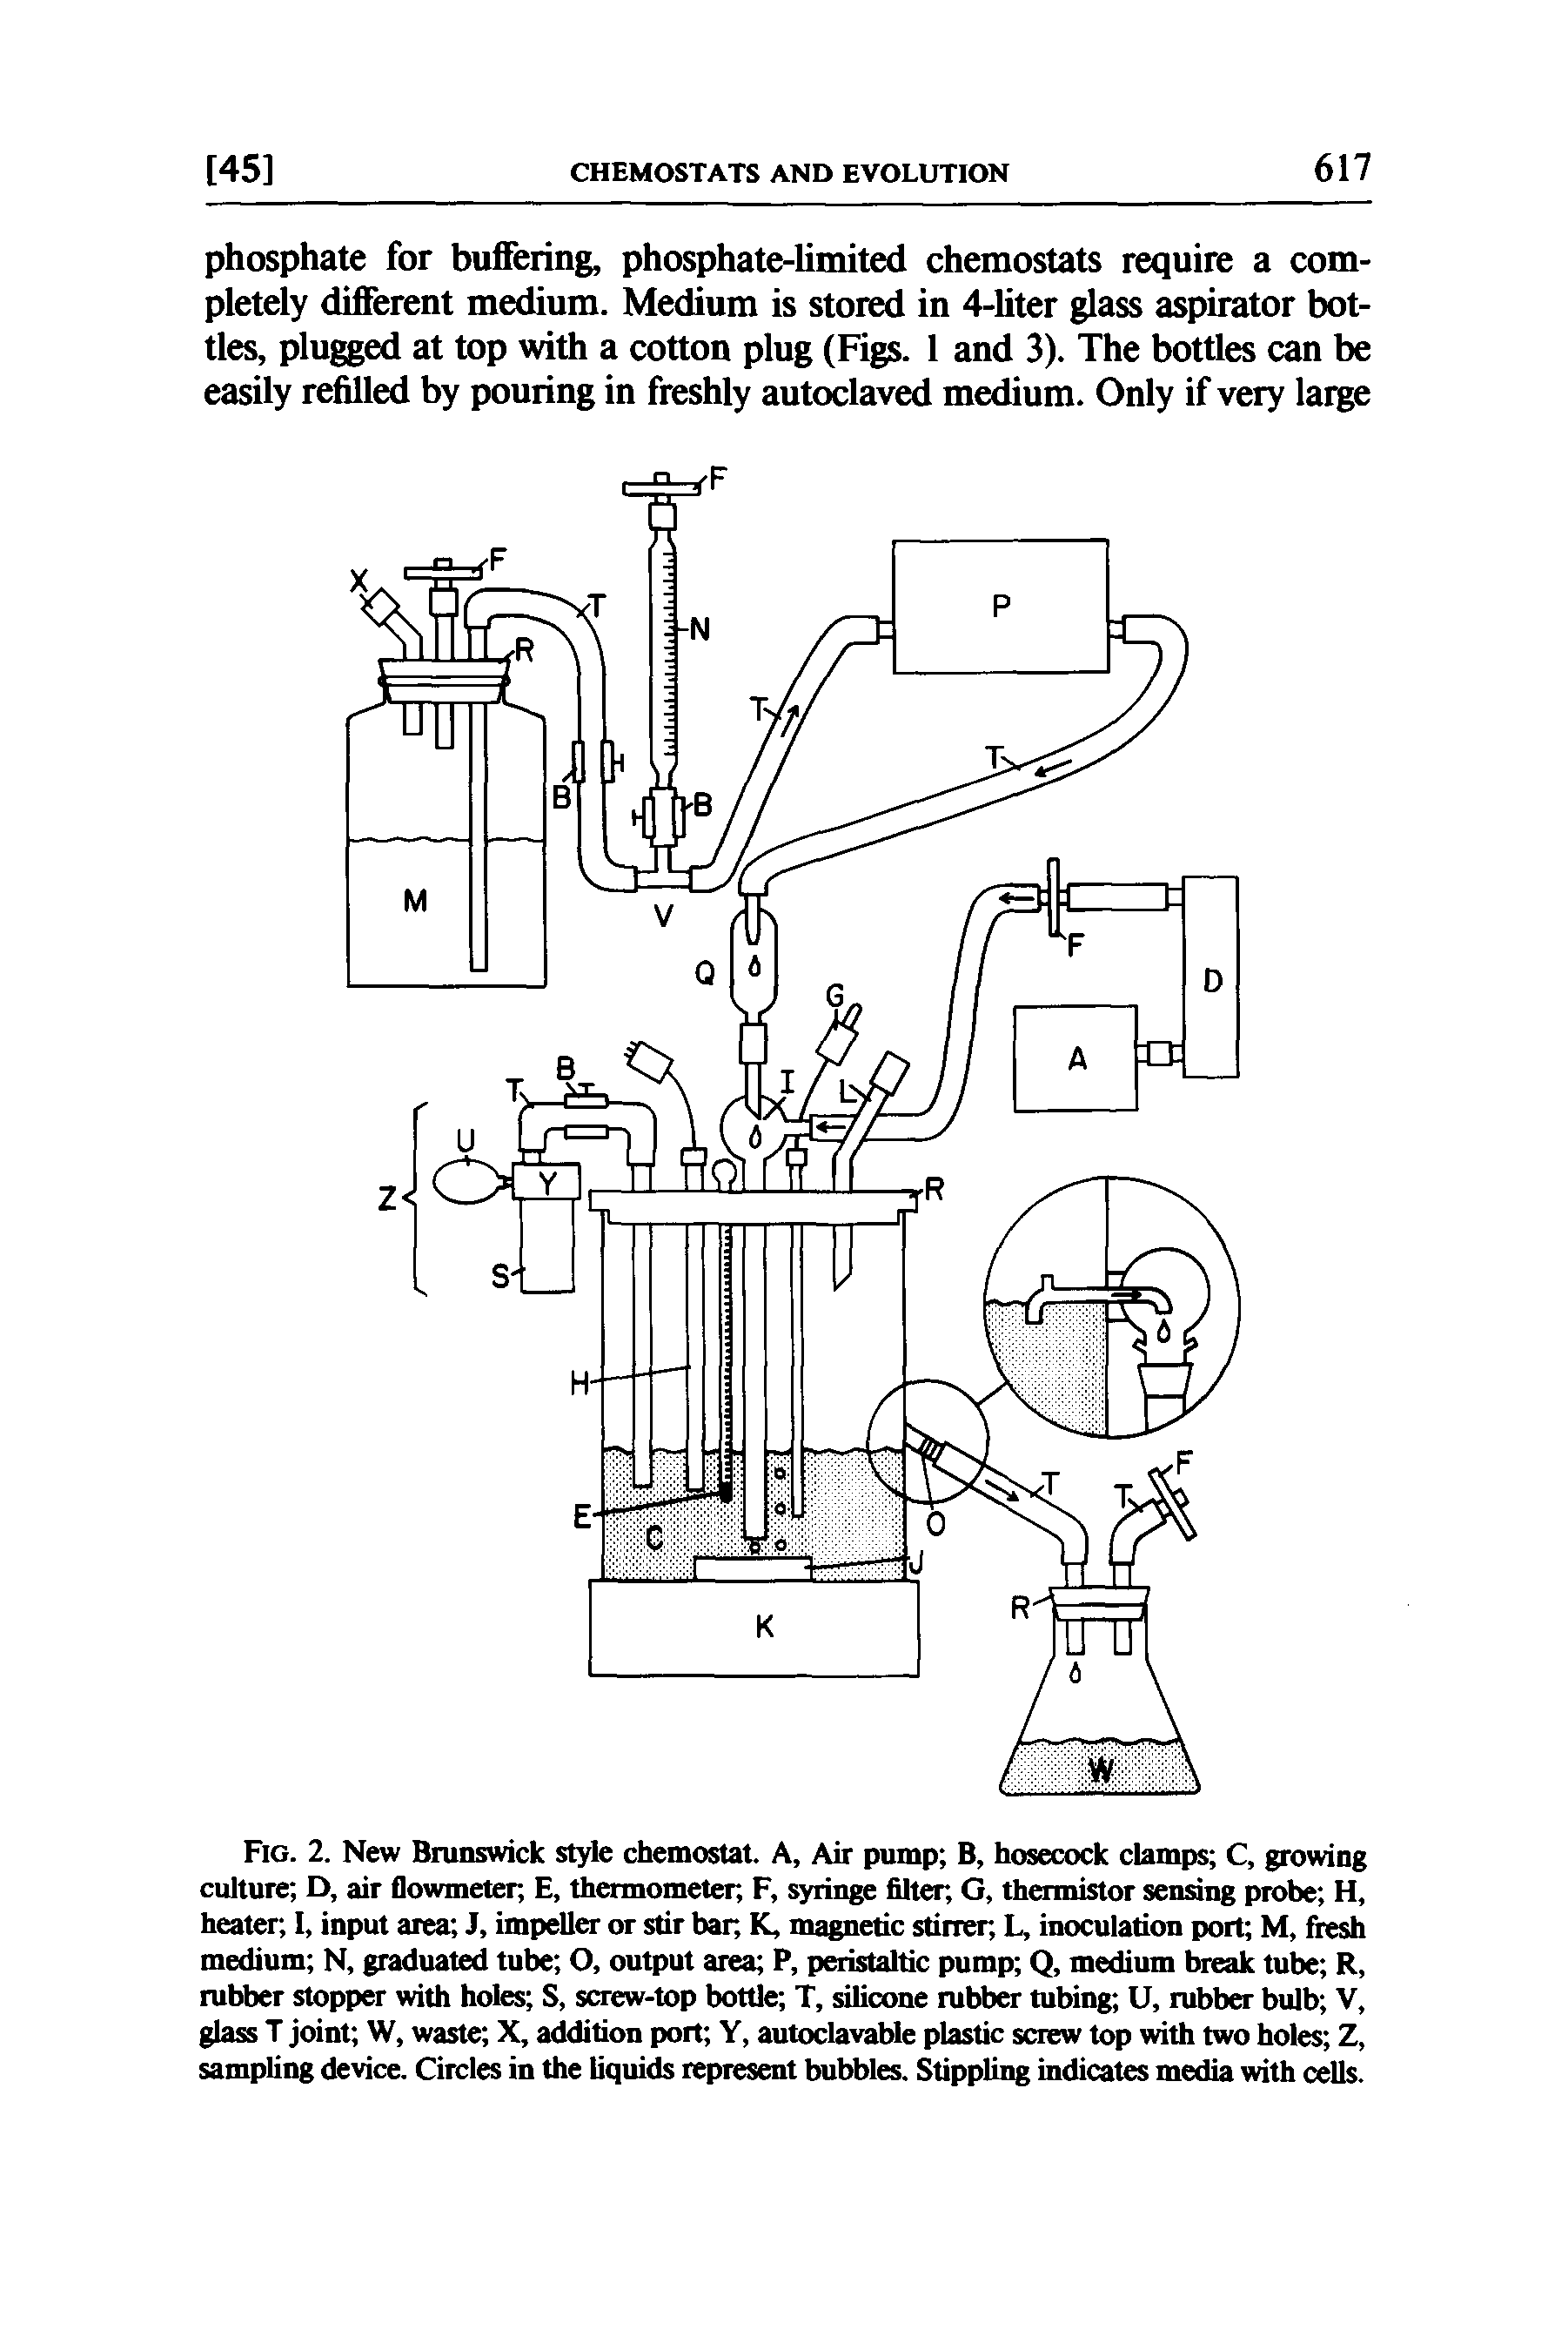 Fig. 2. New Brunswick style chemostat. A, Air pump B, hosecock clamps C, growing culture D, air flowmeter, E, thermometer, F, syringe filter, G, thermistor sensing probe H, heater 1, input area J, impeller or stir bar, K, magnetic stirrer L, inoculation port M, fresh medium N, graduated tube O, output area P, peristaltic pump Q, medium break tube R, rubber stopper with holes S, screw-top bottle T, silicone rubber tubing U, rubber bulb V, glass T joint W, waste X, addition port Y, autoclavable plastic screw top with two holes Z, sampling device. Circles in the liquids represent bubbles. Stippling indicates media with cells.